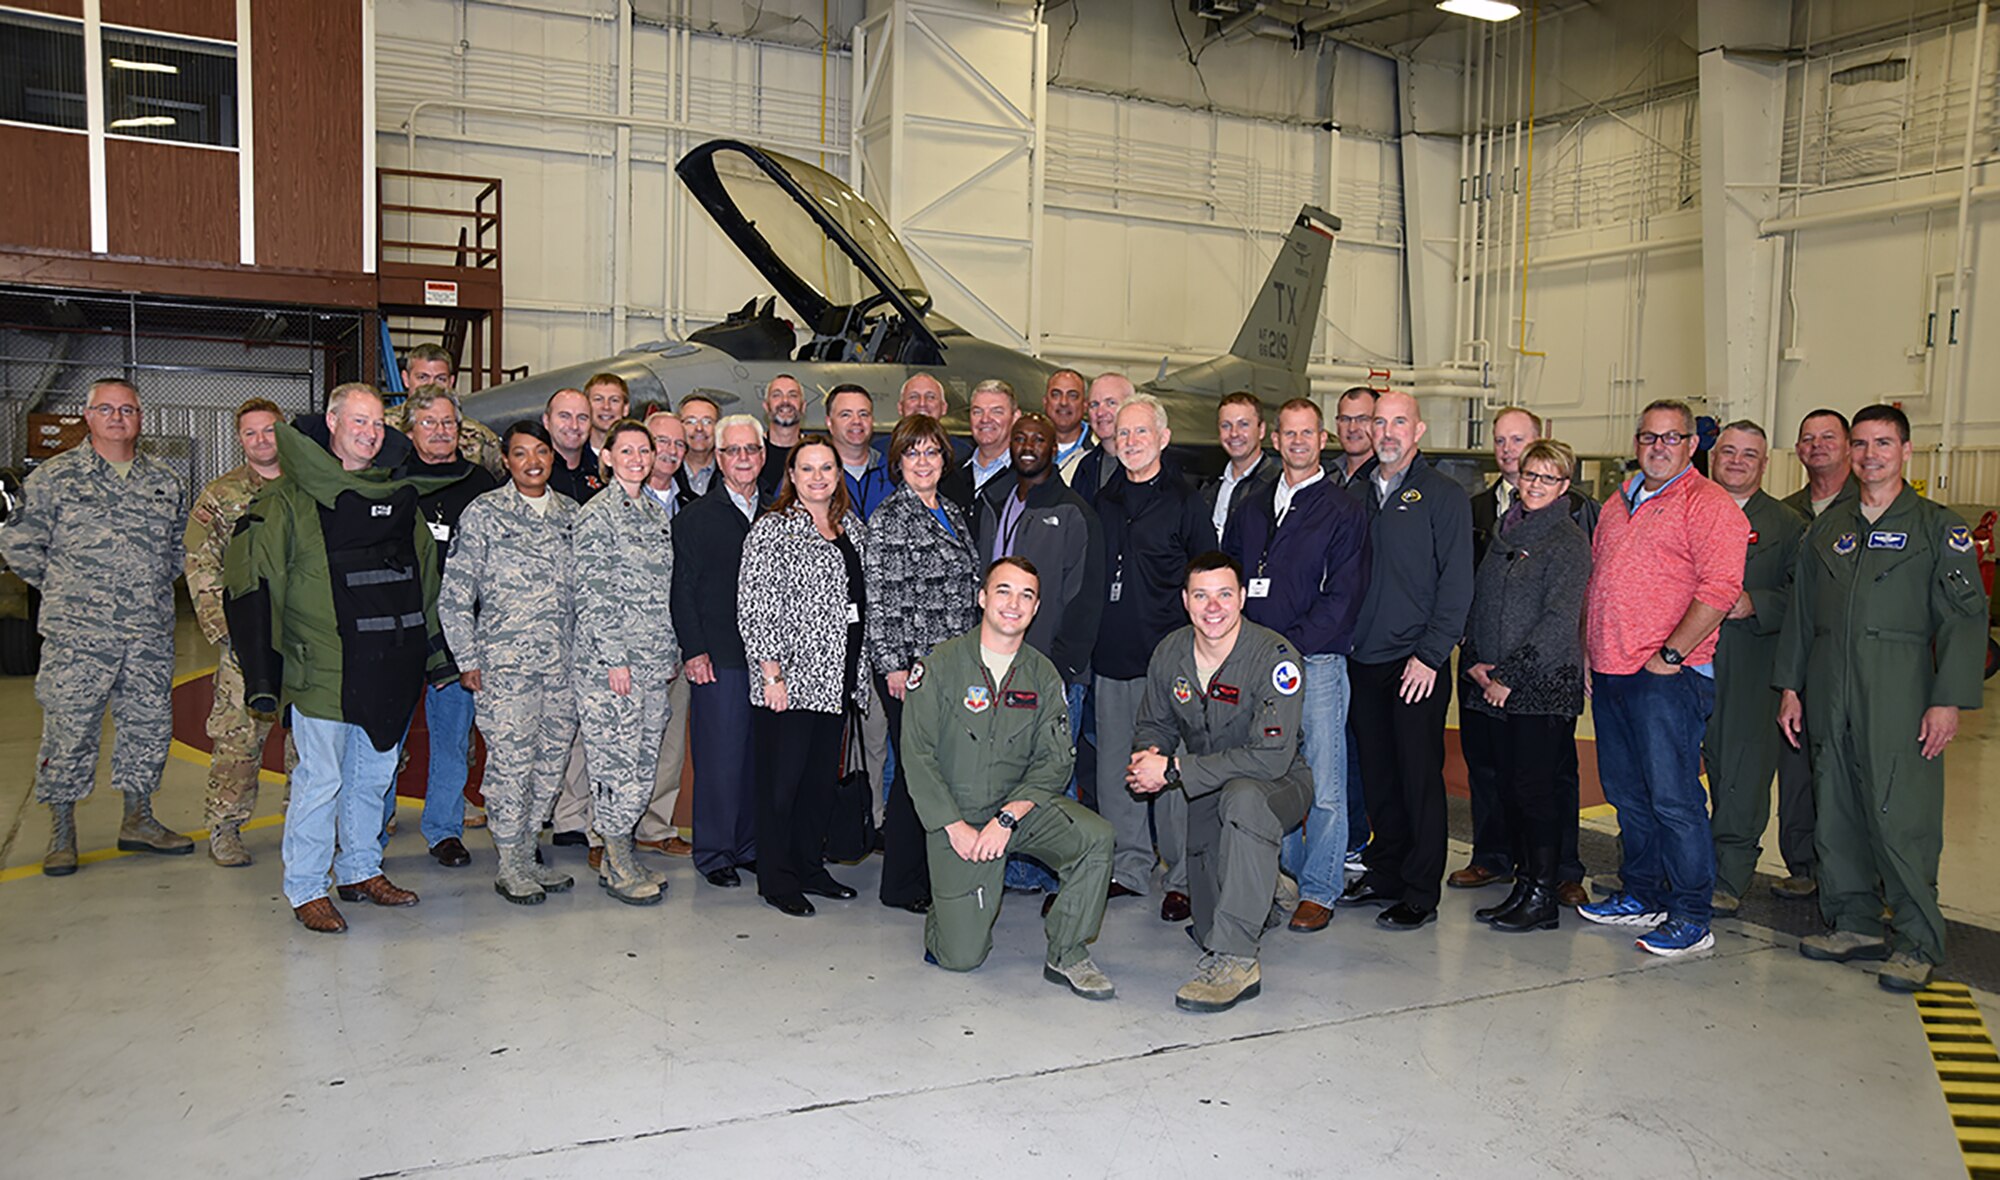 Twenty-five civic leaders from the 442d Fighter Wing visit the 301st Fighter Wing Nov. 9, 2016, at Naval Air Station Fort Worth Joint Reserve Base, Texas. Leaders learned about Air Force Reserve and Guard capabilities by visiting multiple units on base. (U.S. Air Force photo by Julie Briden-Garcia)
